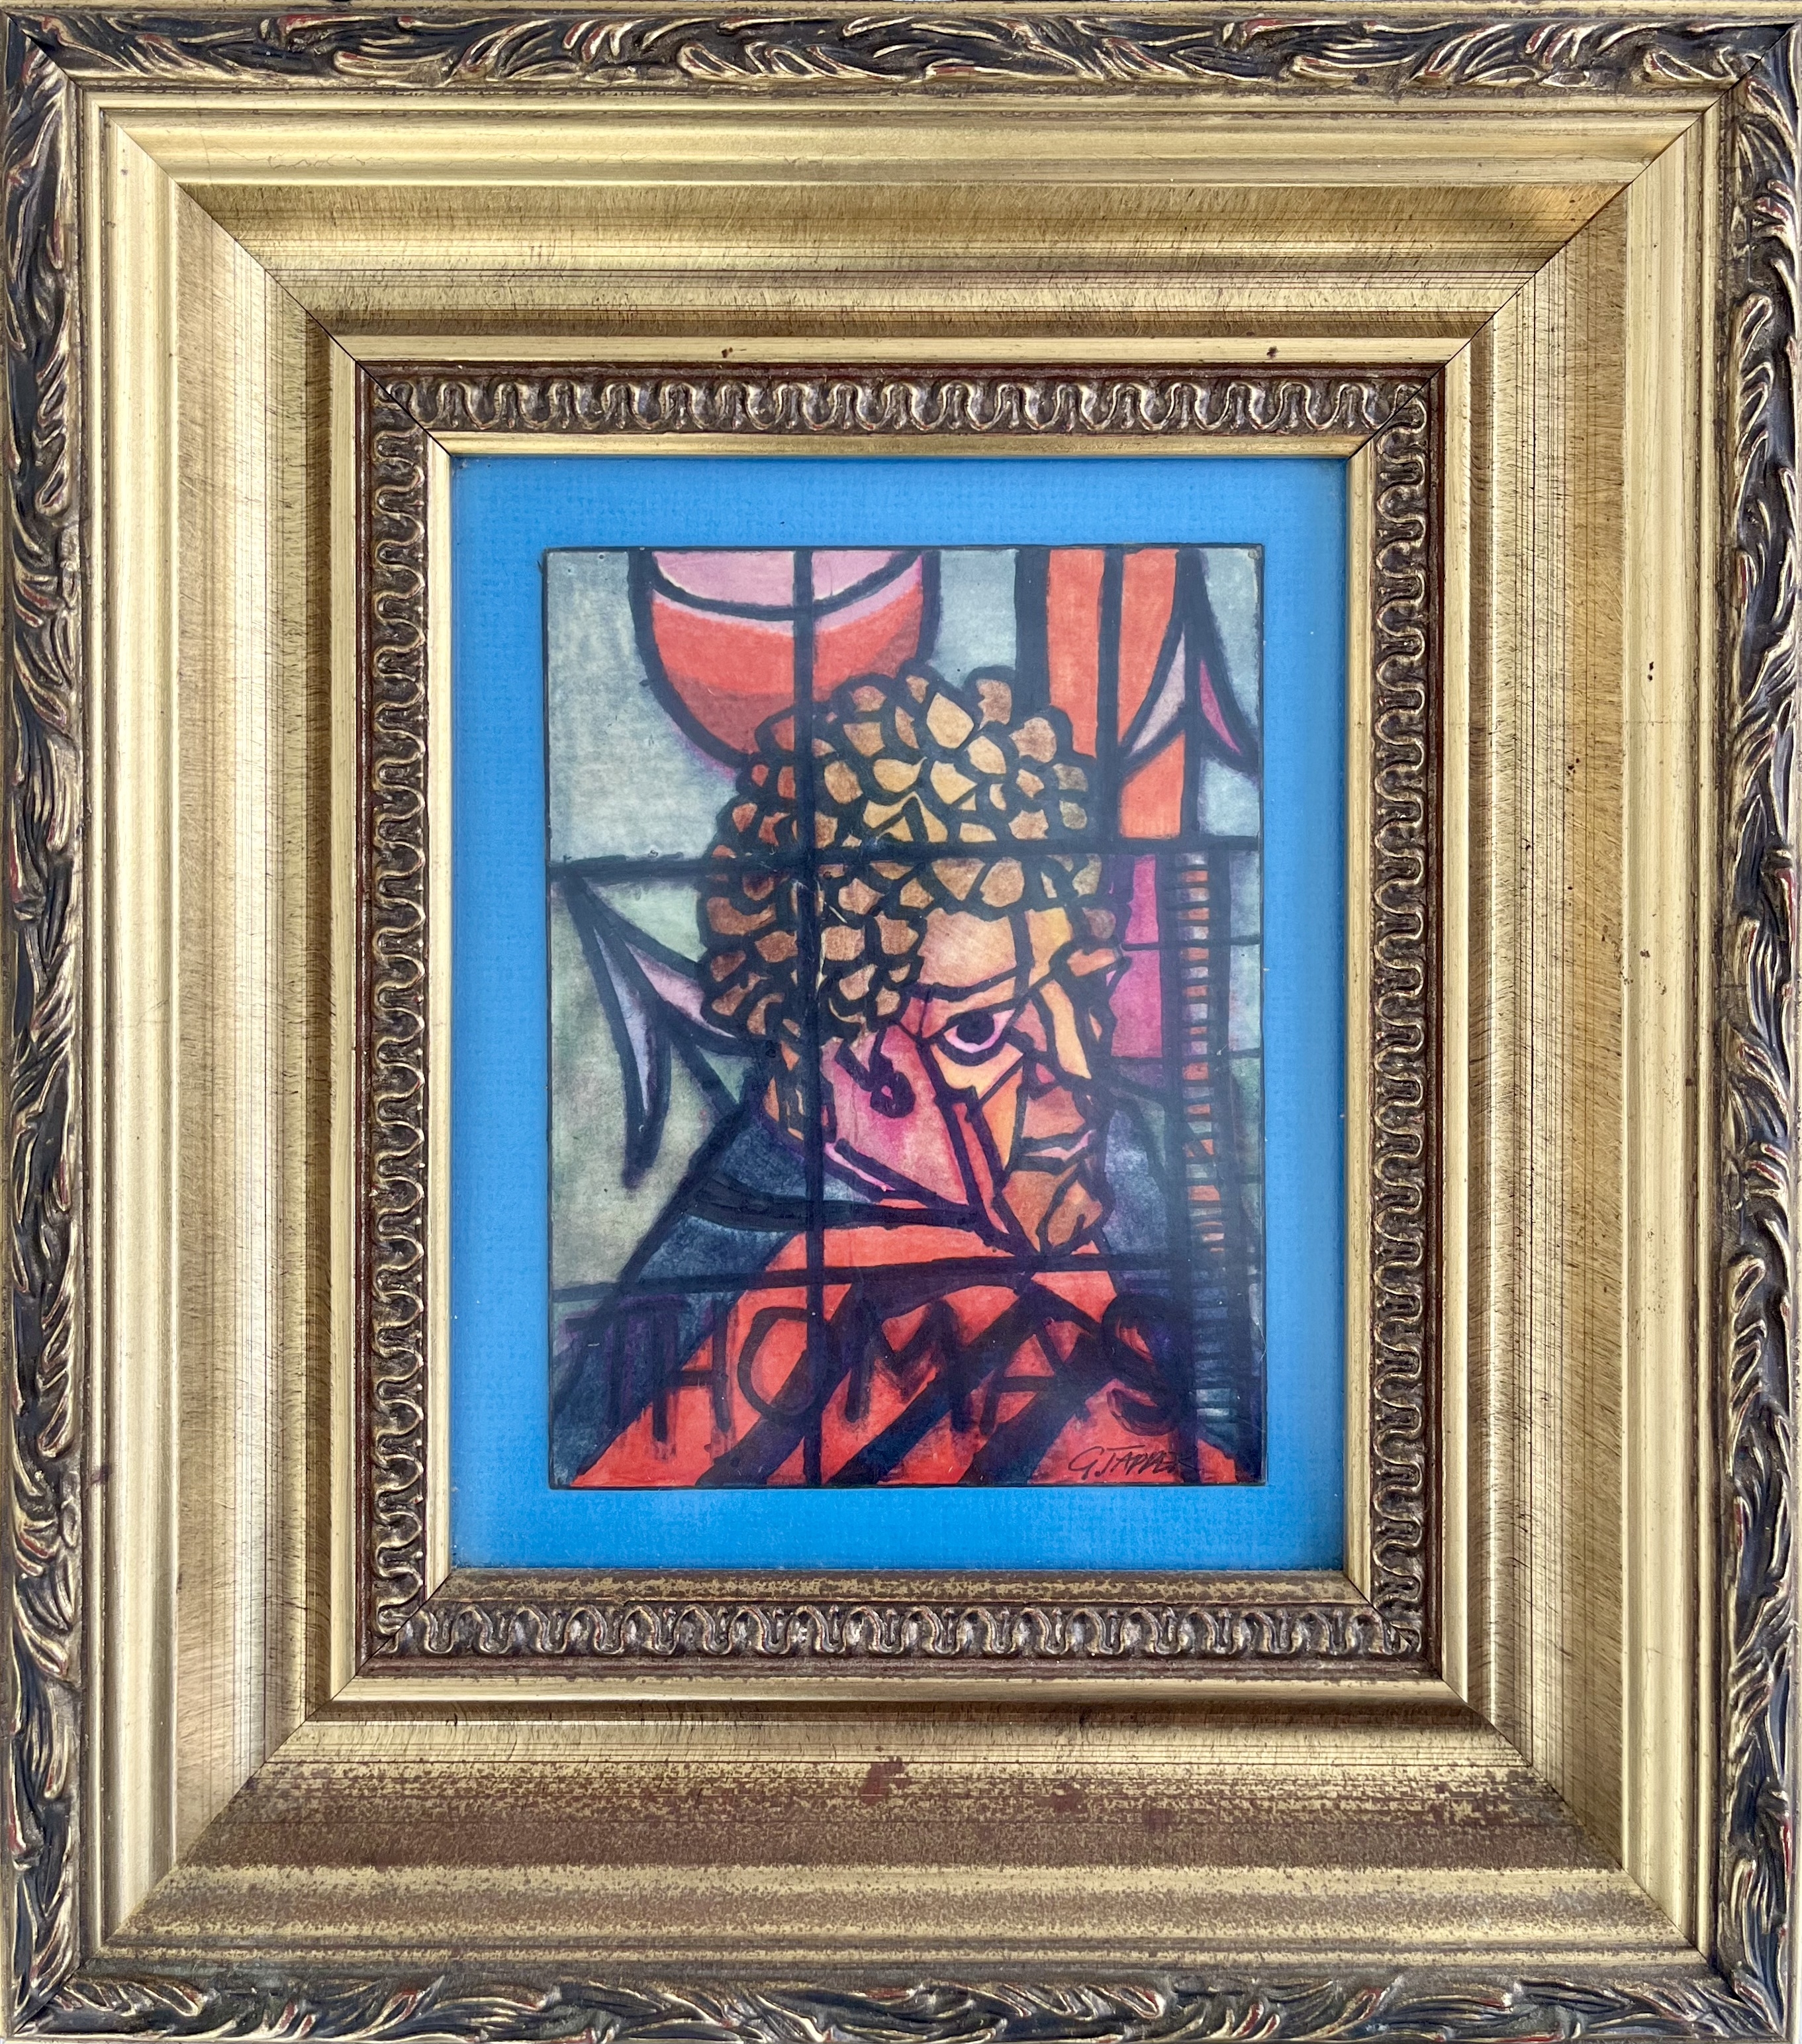 Artwork by Garth Tapper, Apostle -"Thomas"- stained glass window design, Ohaeawai, Made of STAINED GLASS WINDOW DESIGN